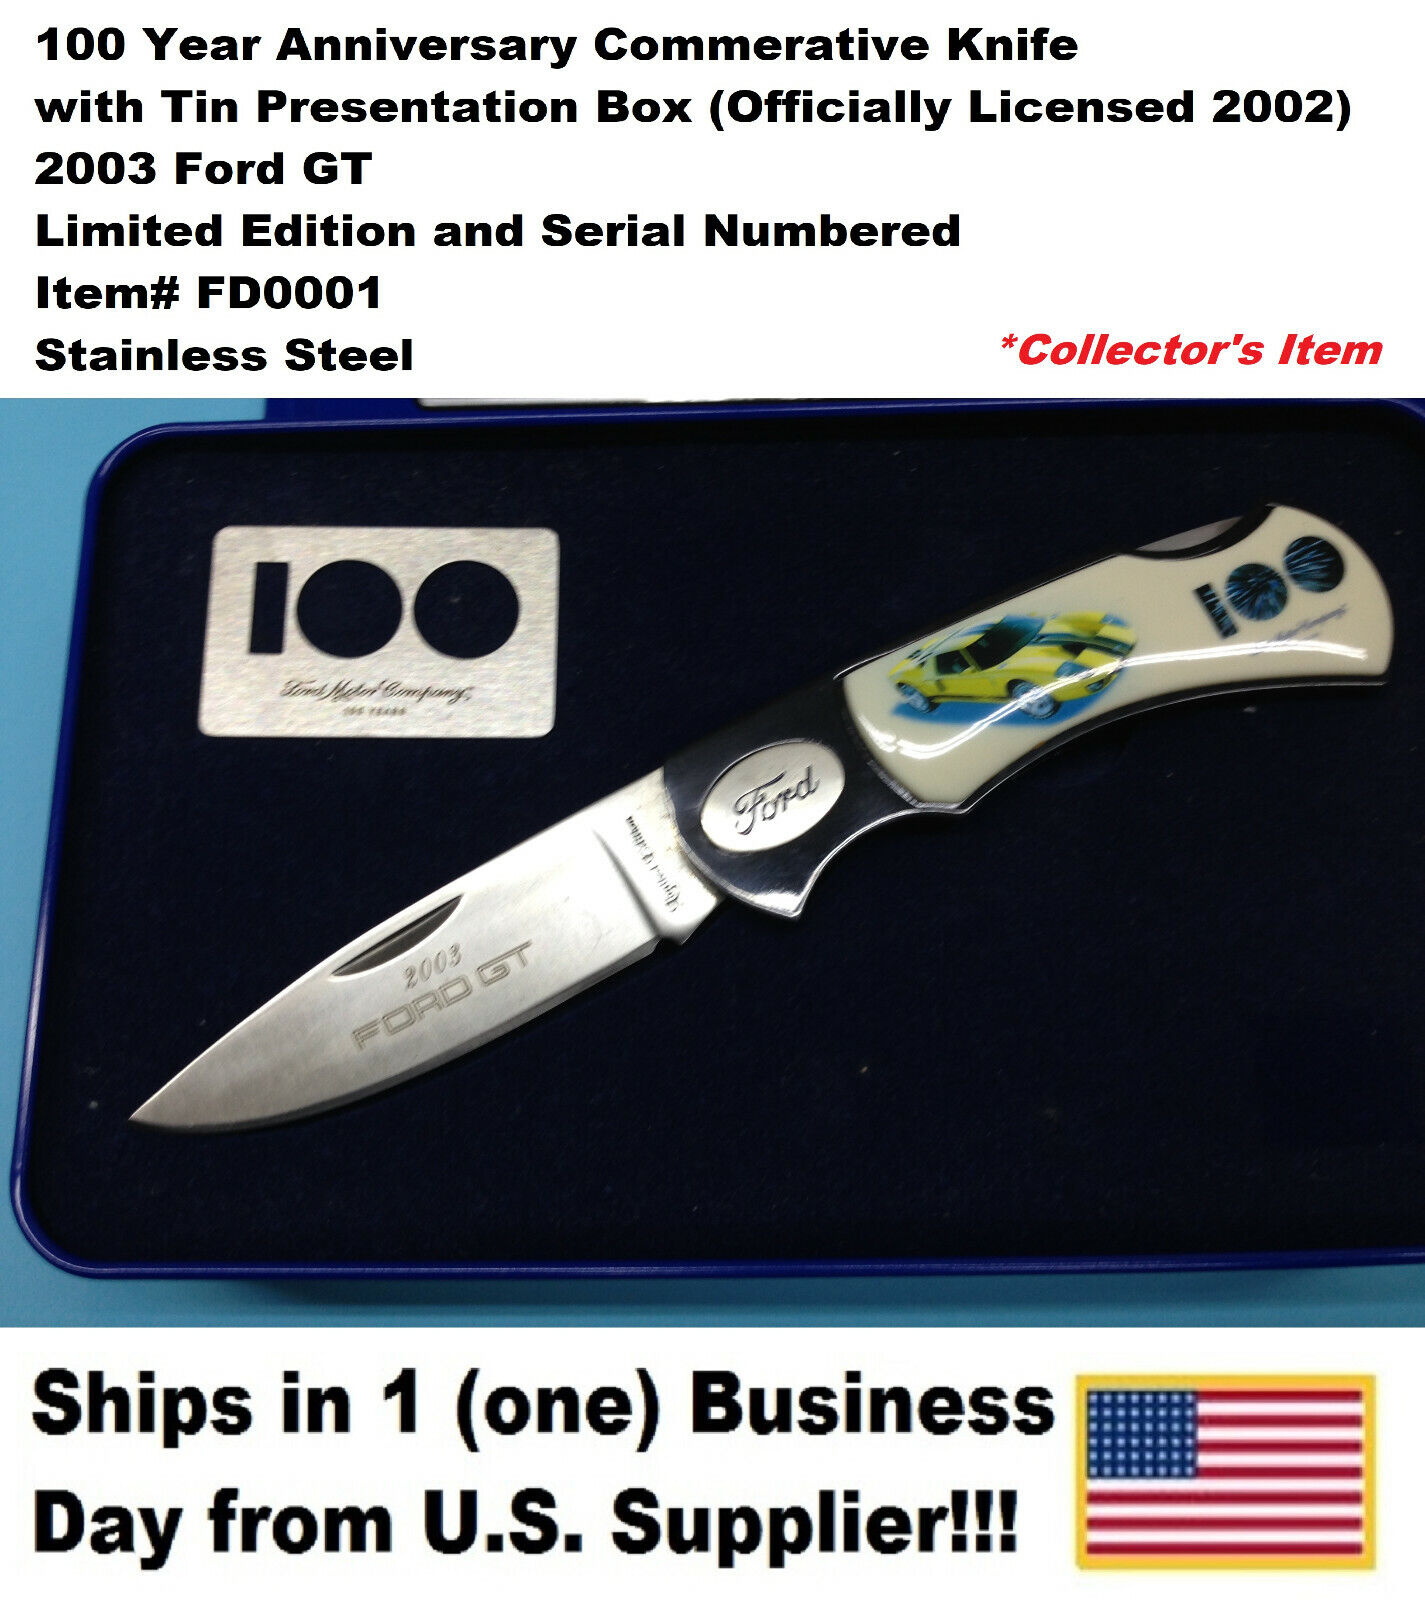 2003 FORD GT COMMEMORATIVE KNIFE W/BOX  (New, Dealer Old Stock-2002)